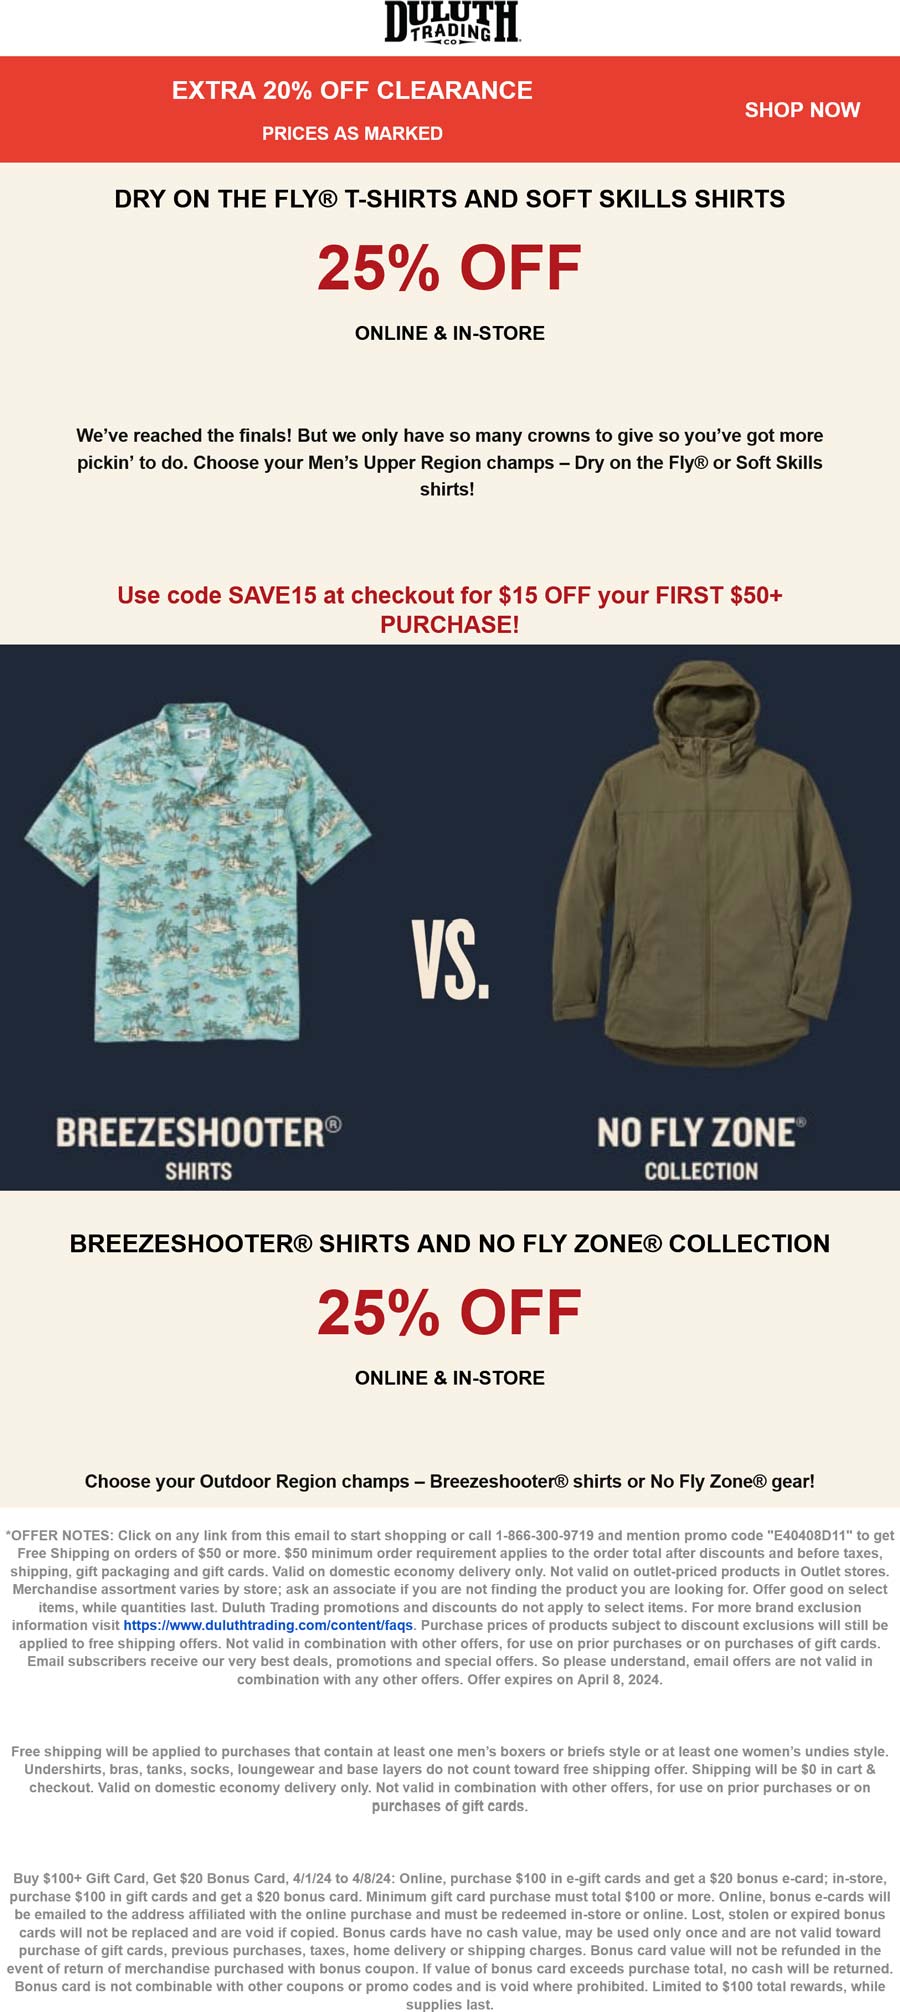 Duluth Trading Co stores Coupon  $15 off $50 & more at Duluth Trading Co via promo code SAVE15 #duluthtradingco 